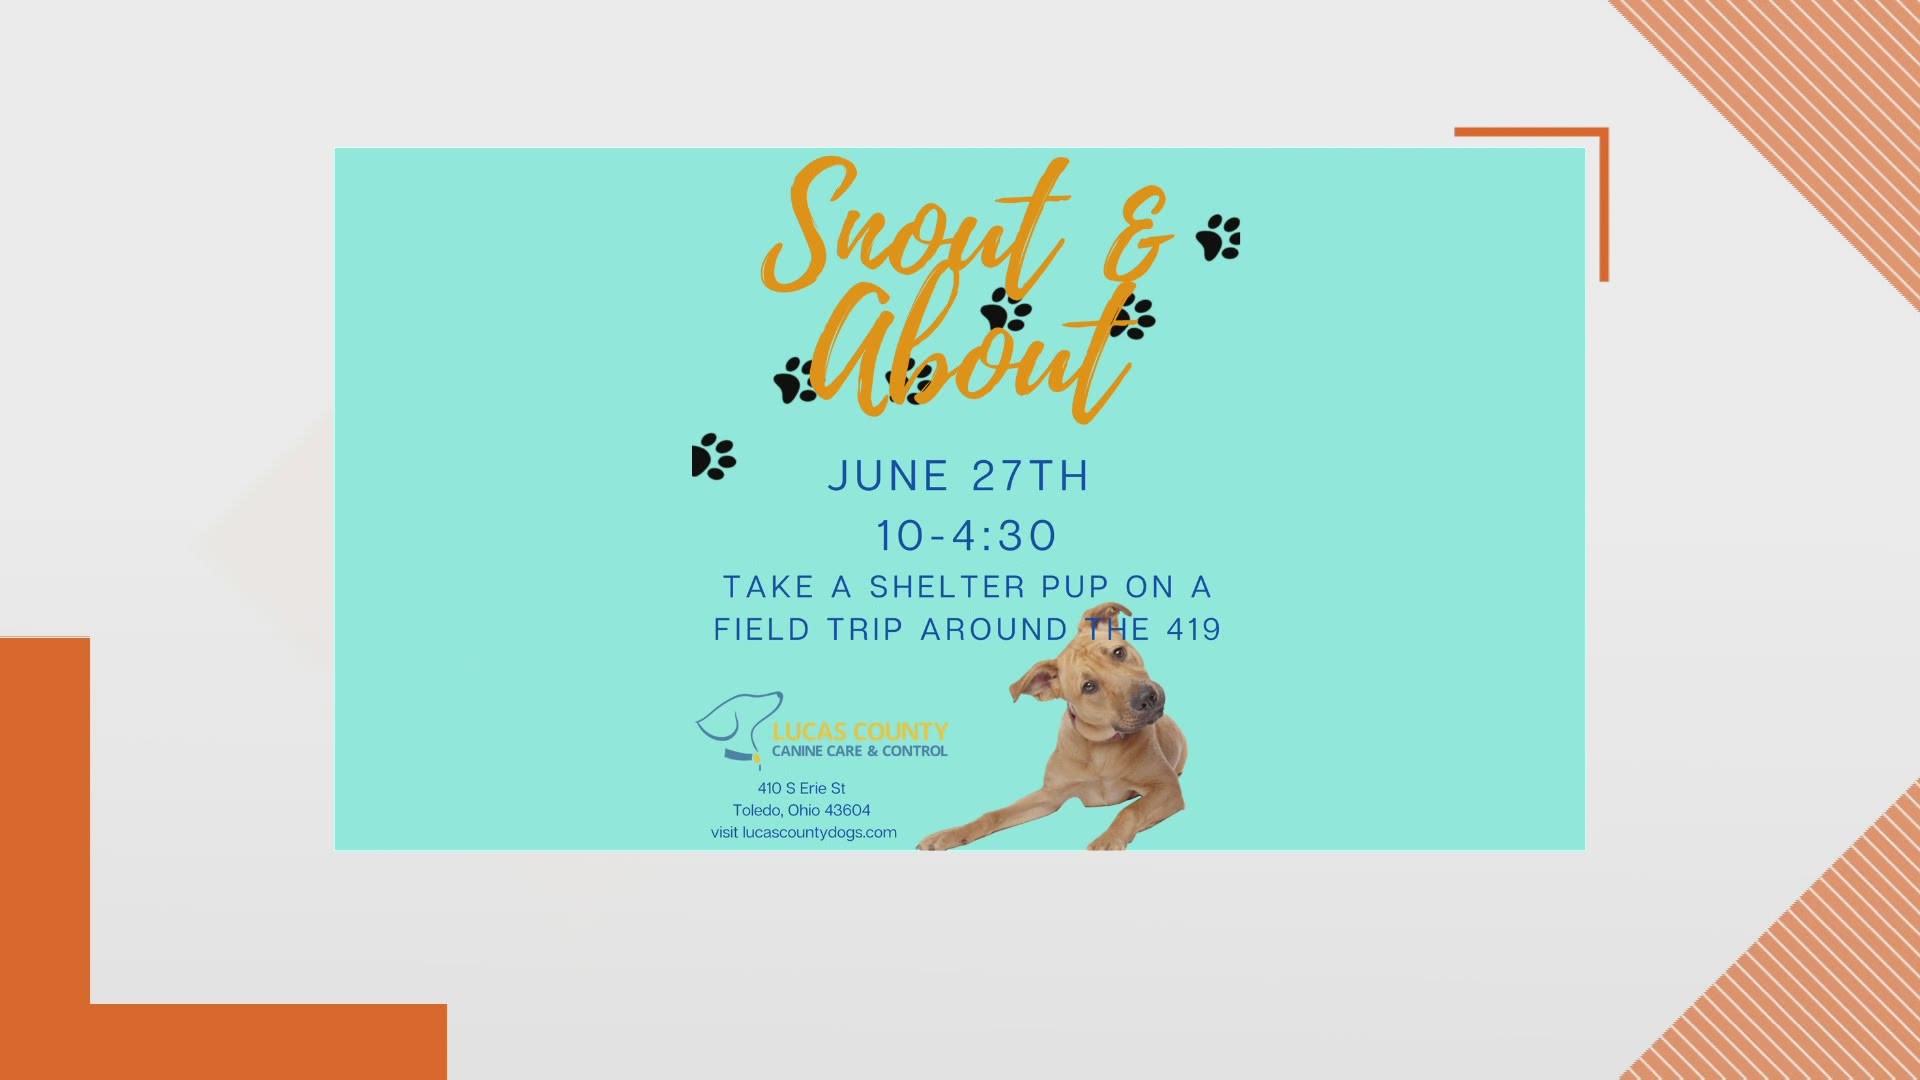 Get a forever friend for this summer with Lucas County Canine Care and Control's "Snout and About" event!